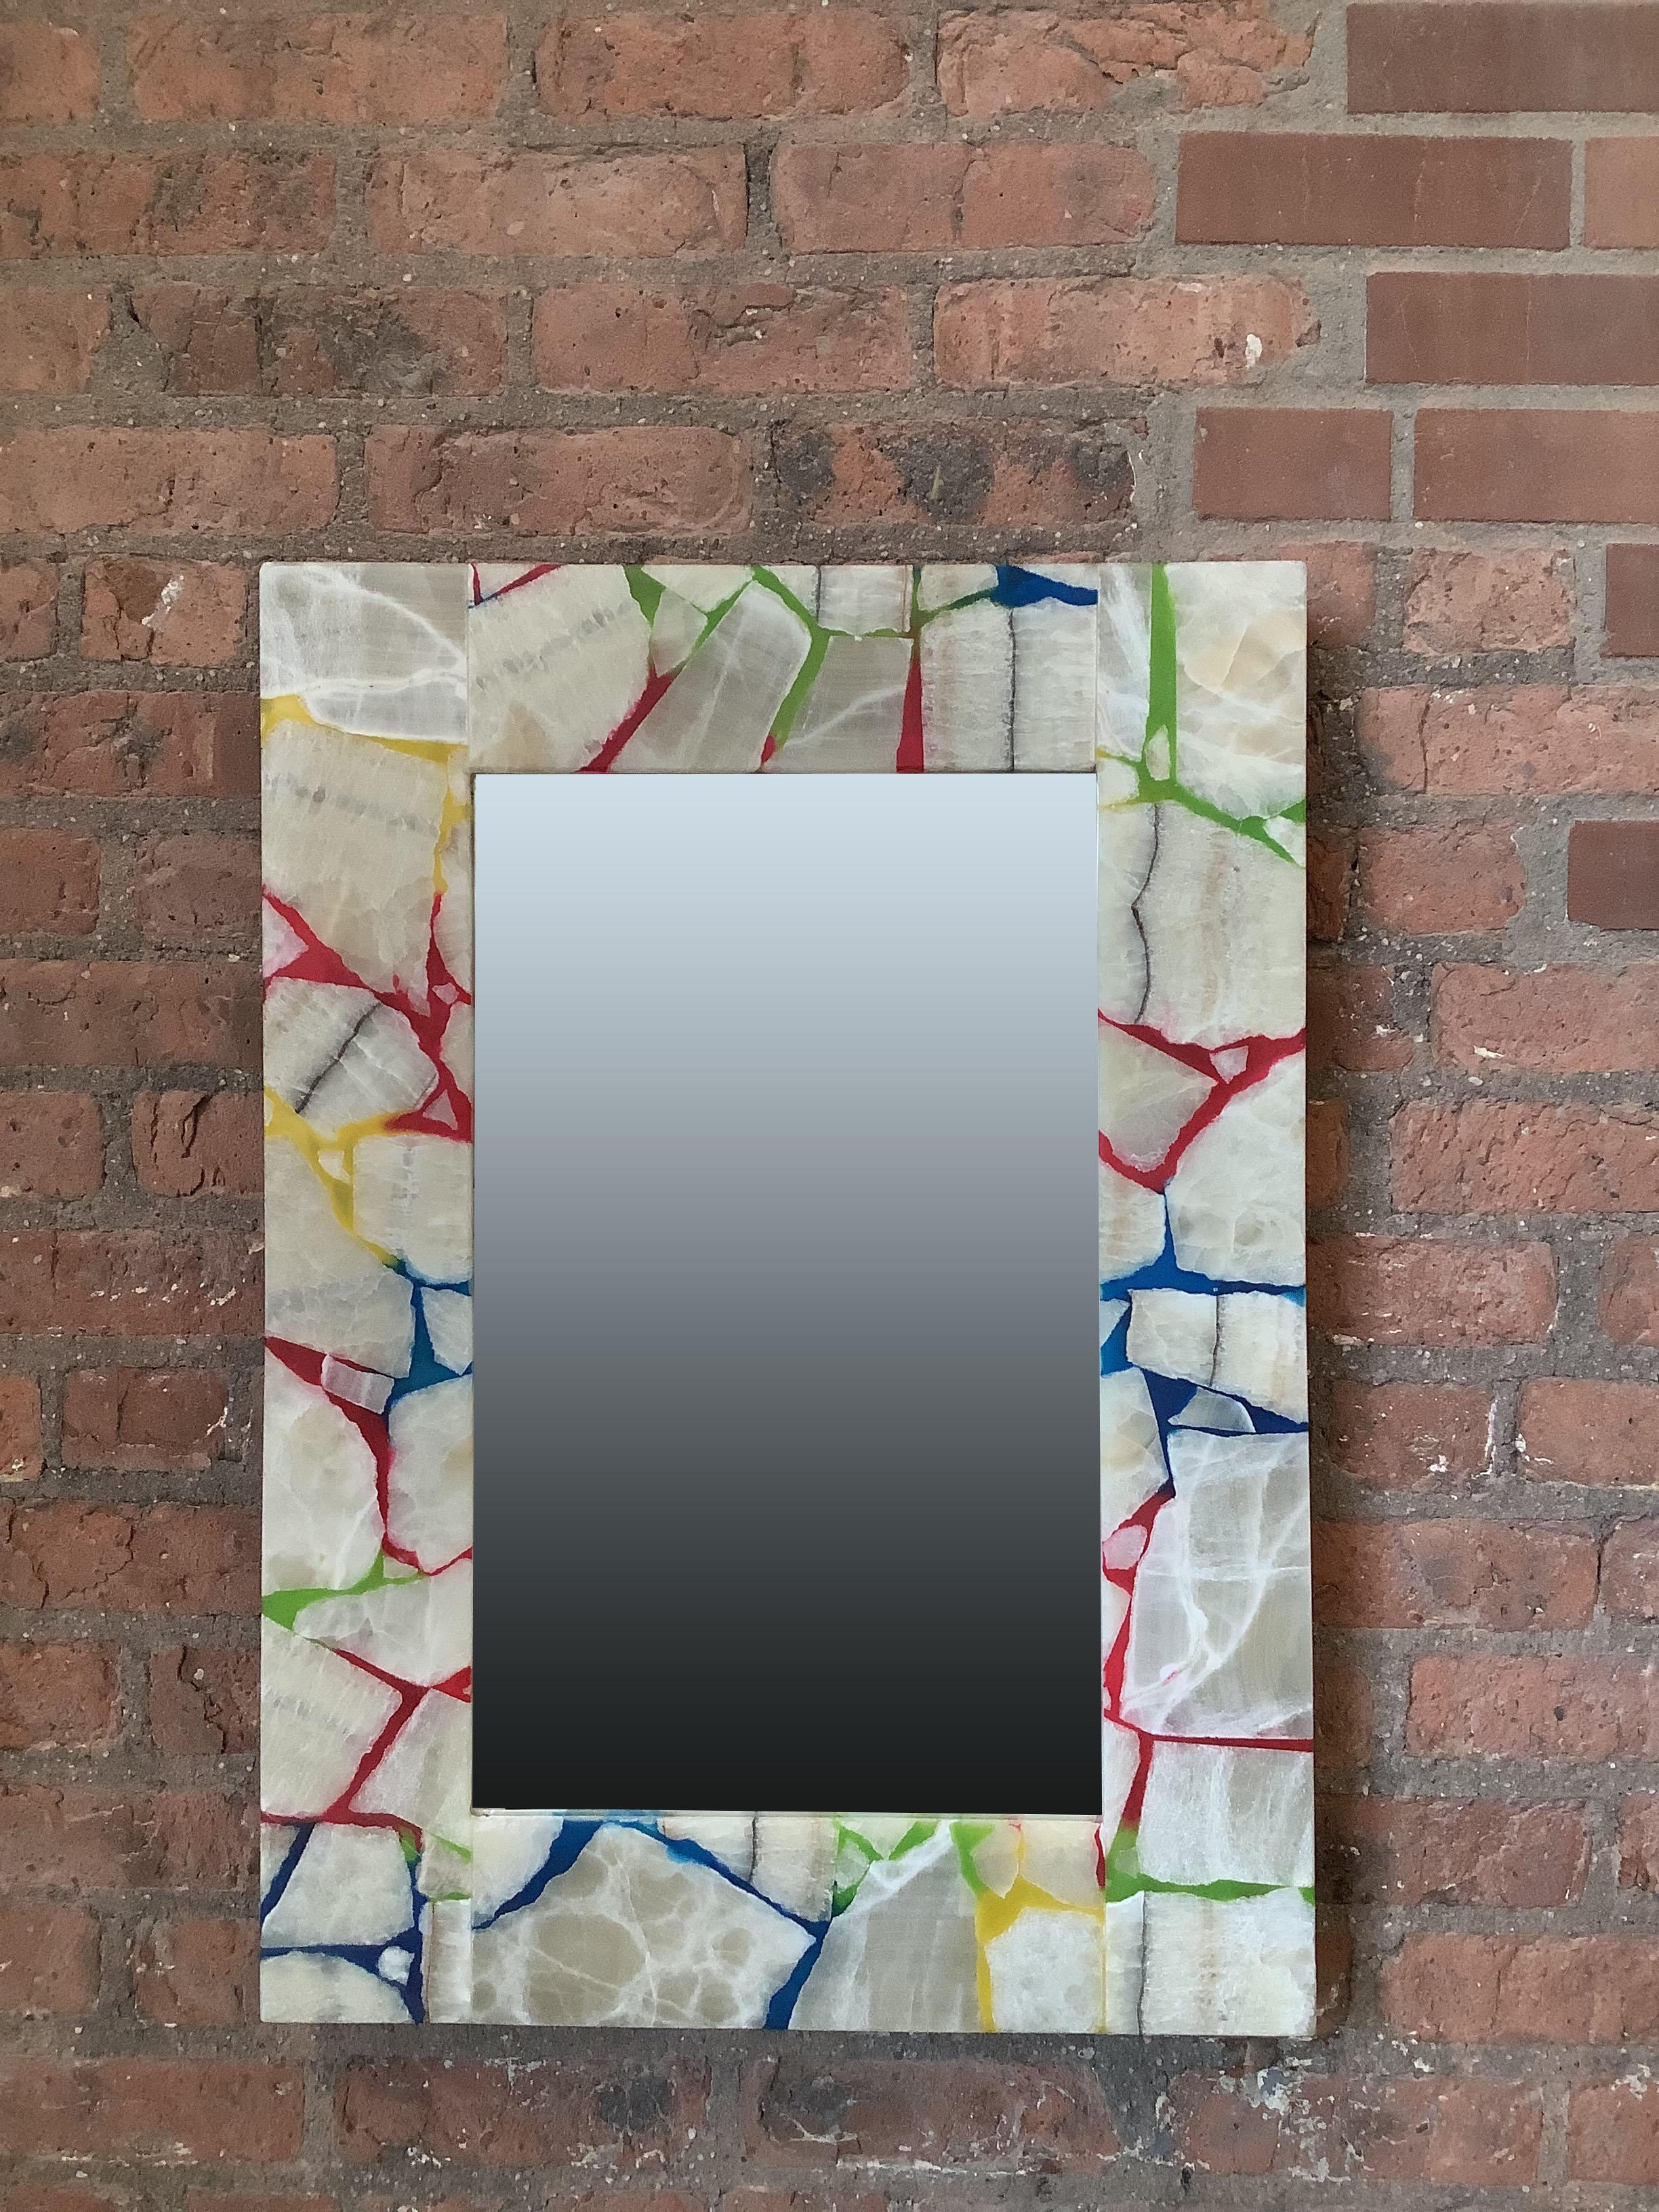 Carved Rainbow Mirror with Onyx Frame For Sale